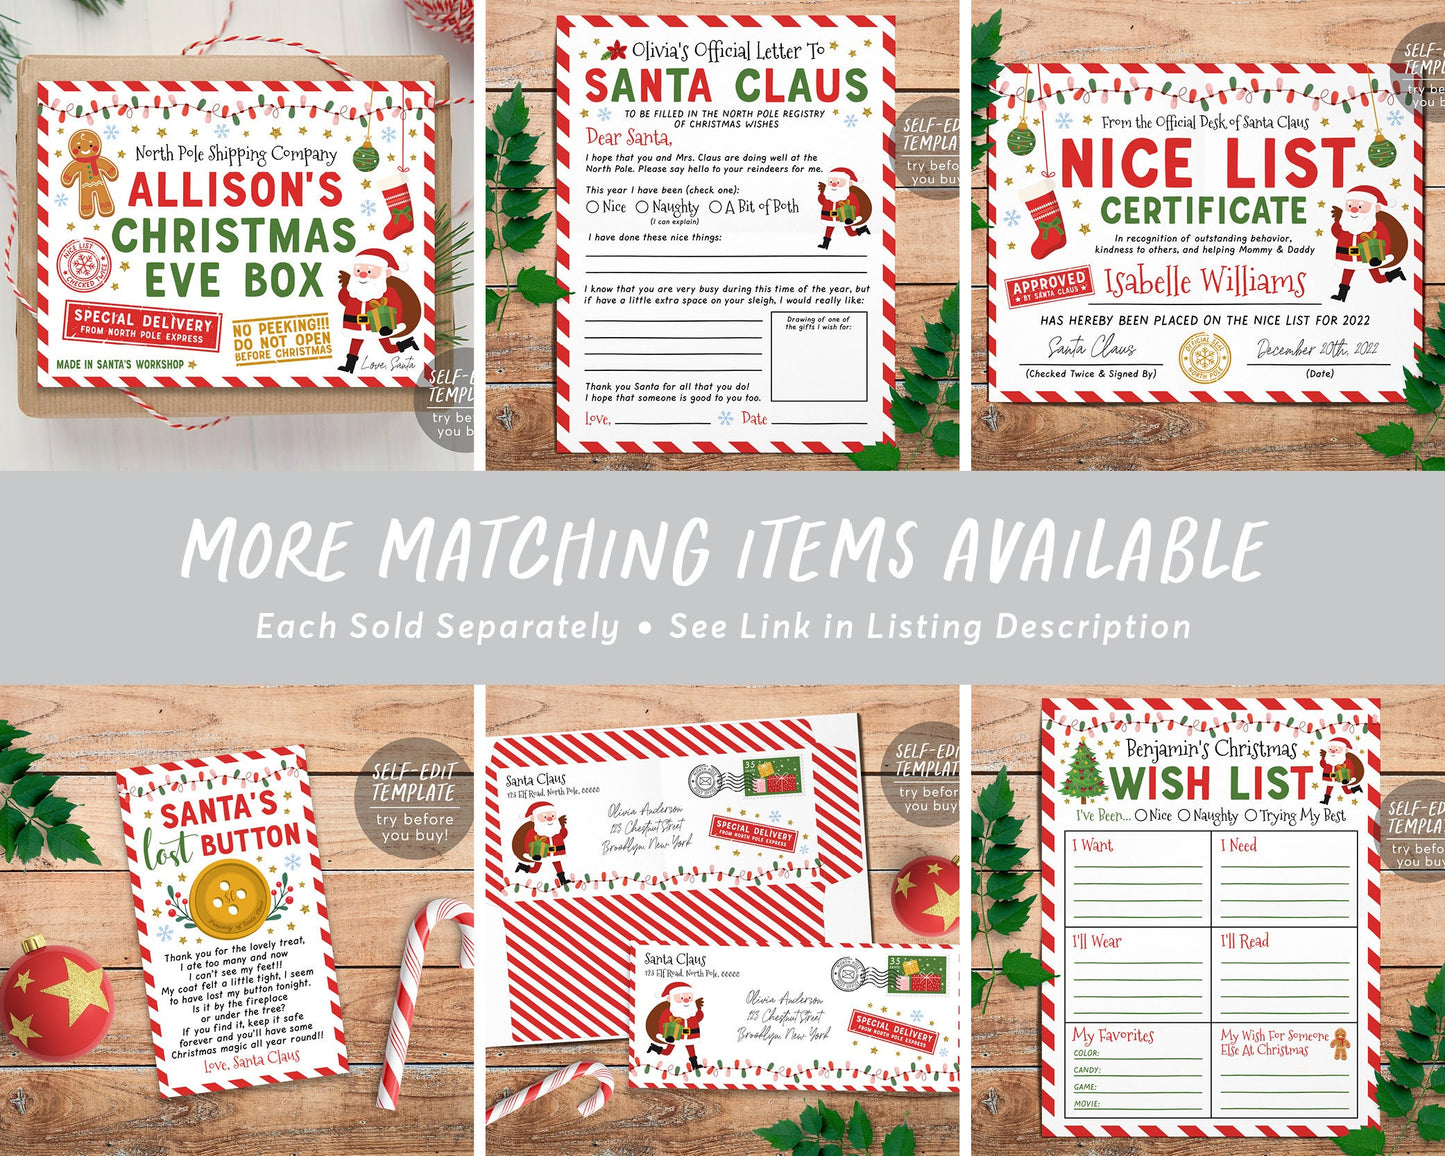 Christmas Hot Chocolate Bomb Tag Editable Template, Santa Hot Cocoa Bomb Tags Sticker Labels Printable, Christmas Party Favor Download